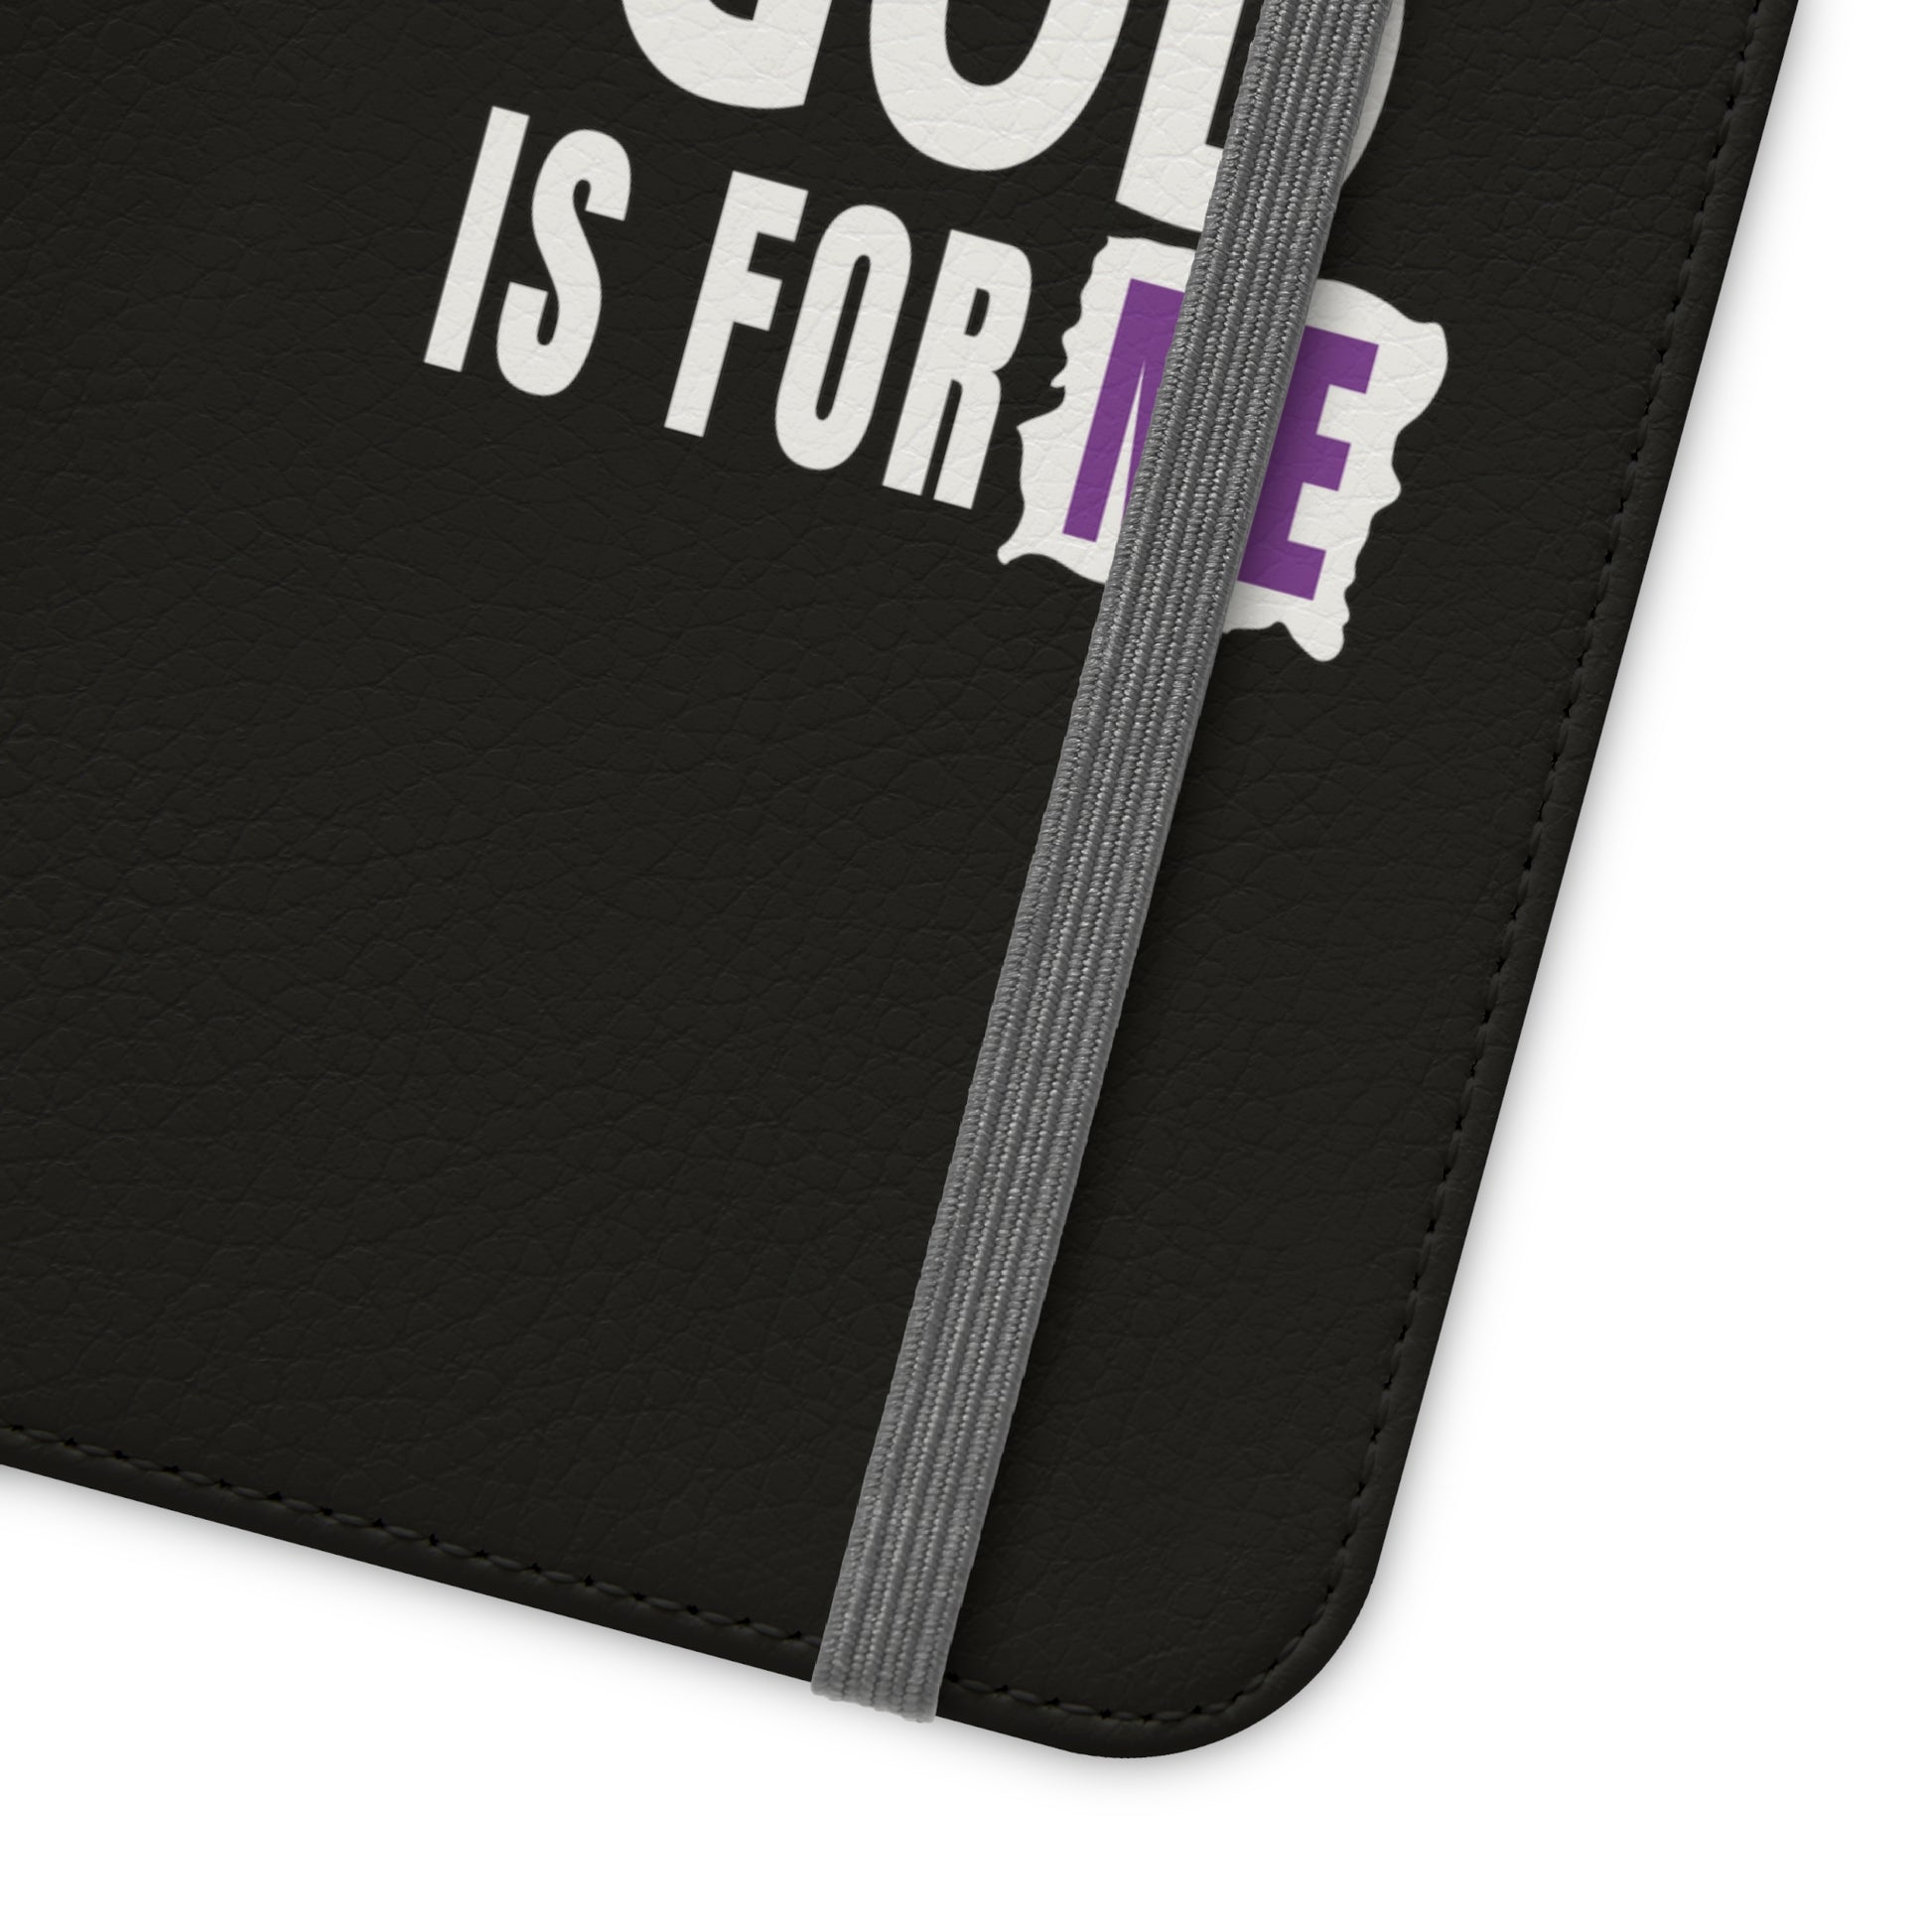 God Is For Me Christian Phone Flip Cases Printify